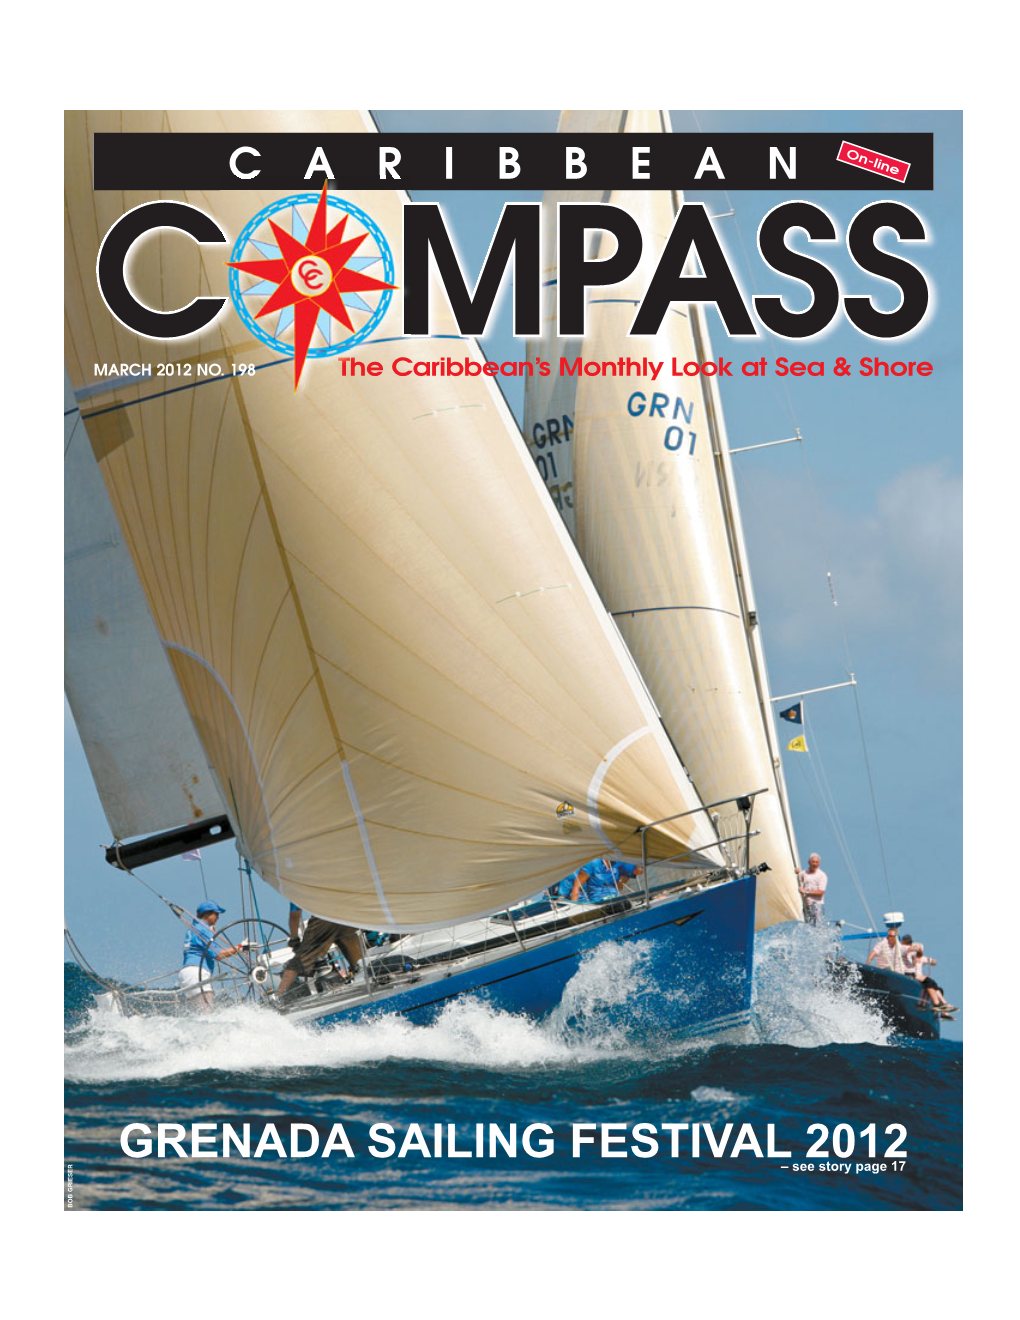 GRENADA SAILING FESTIVAL 2012 – See Story Page 17 BOB GRIESER MARCH 2012 CARIBBEAN COMPASS PAGE 2 MARCH 2012 CARIBBEAN COMPASS PAGE 3